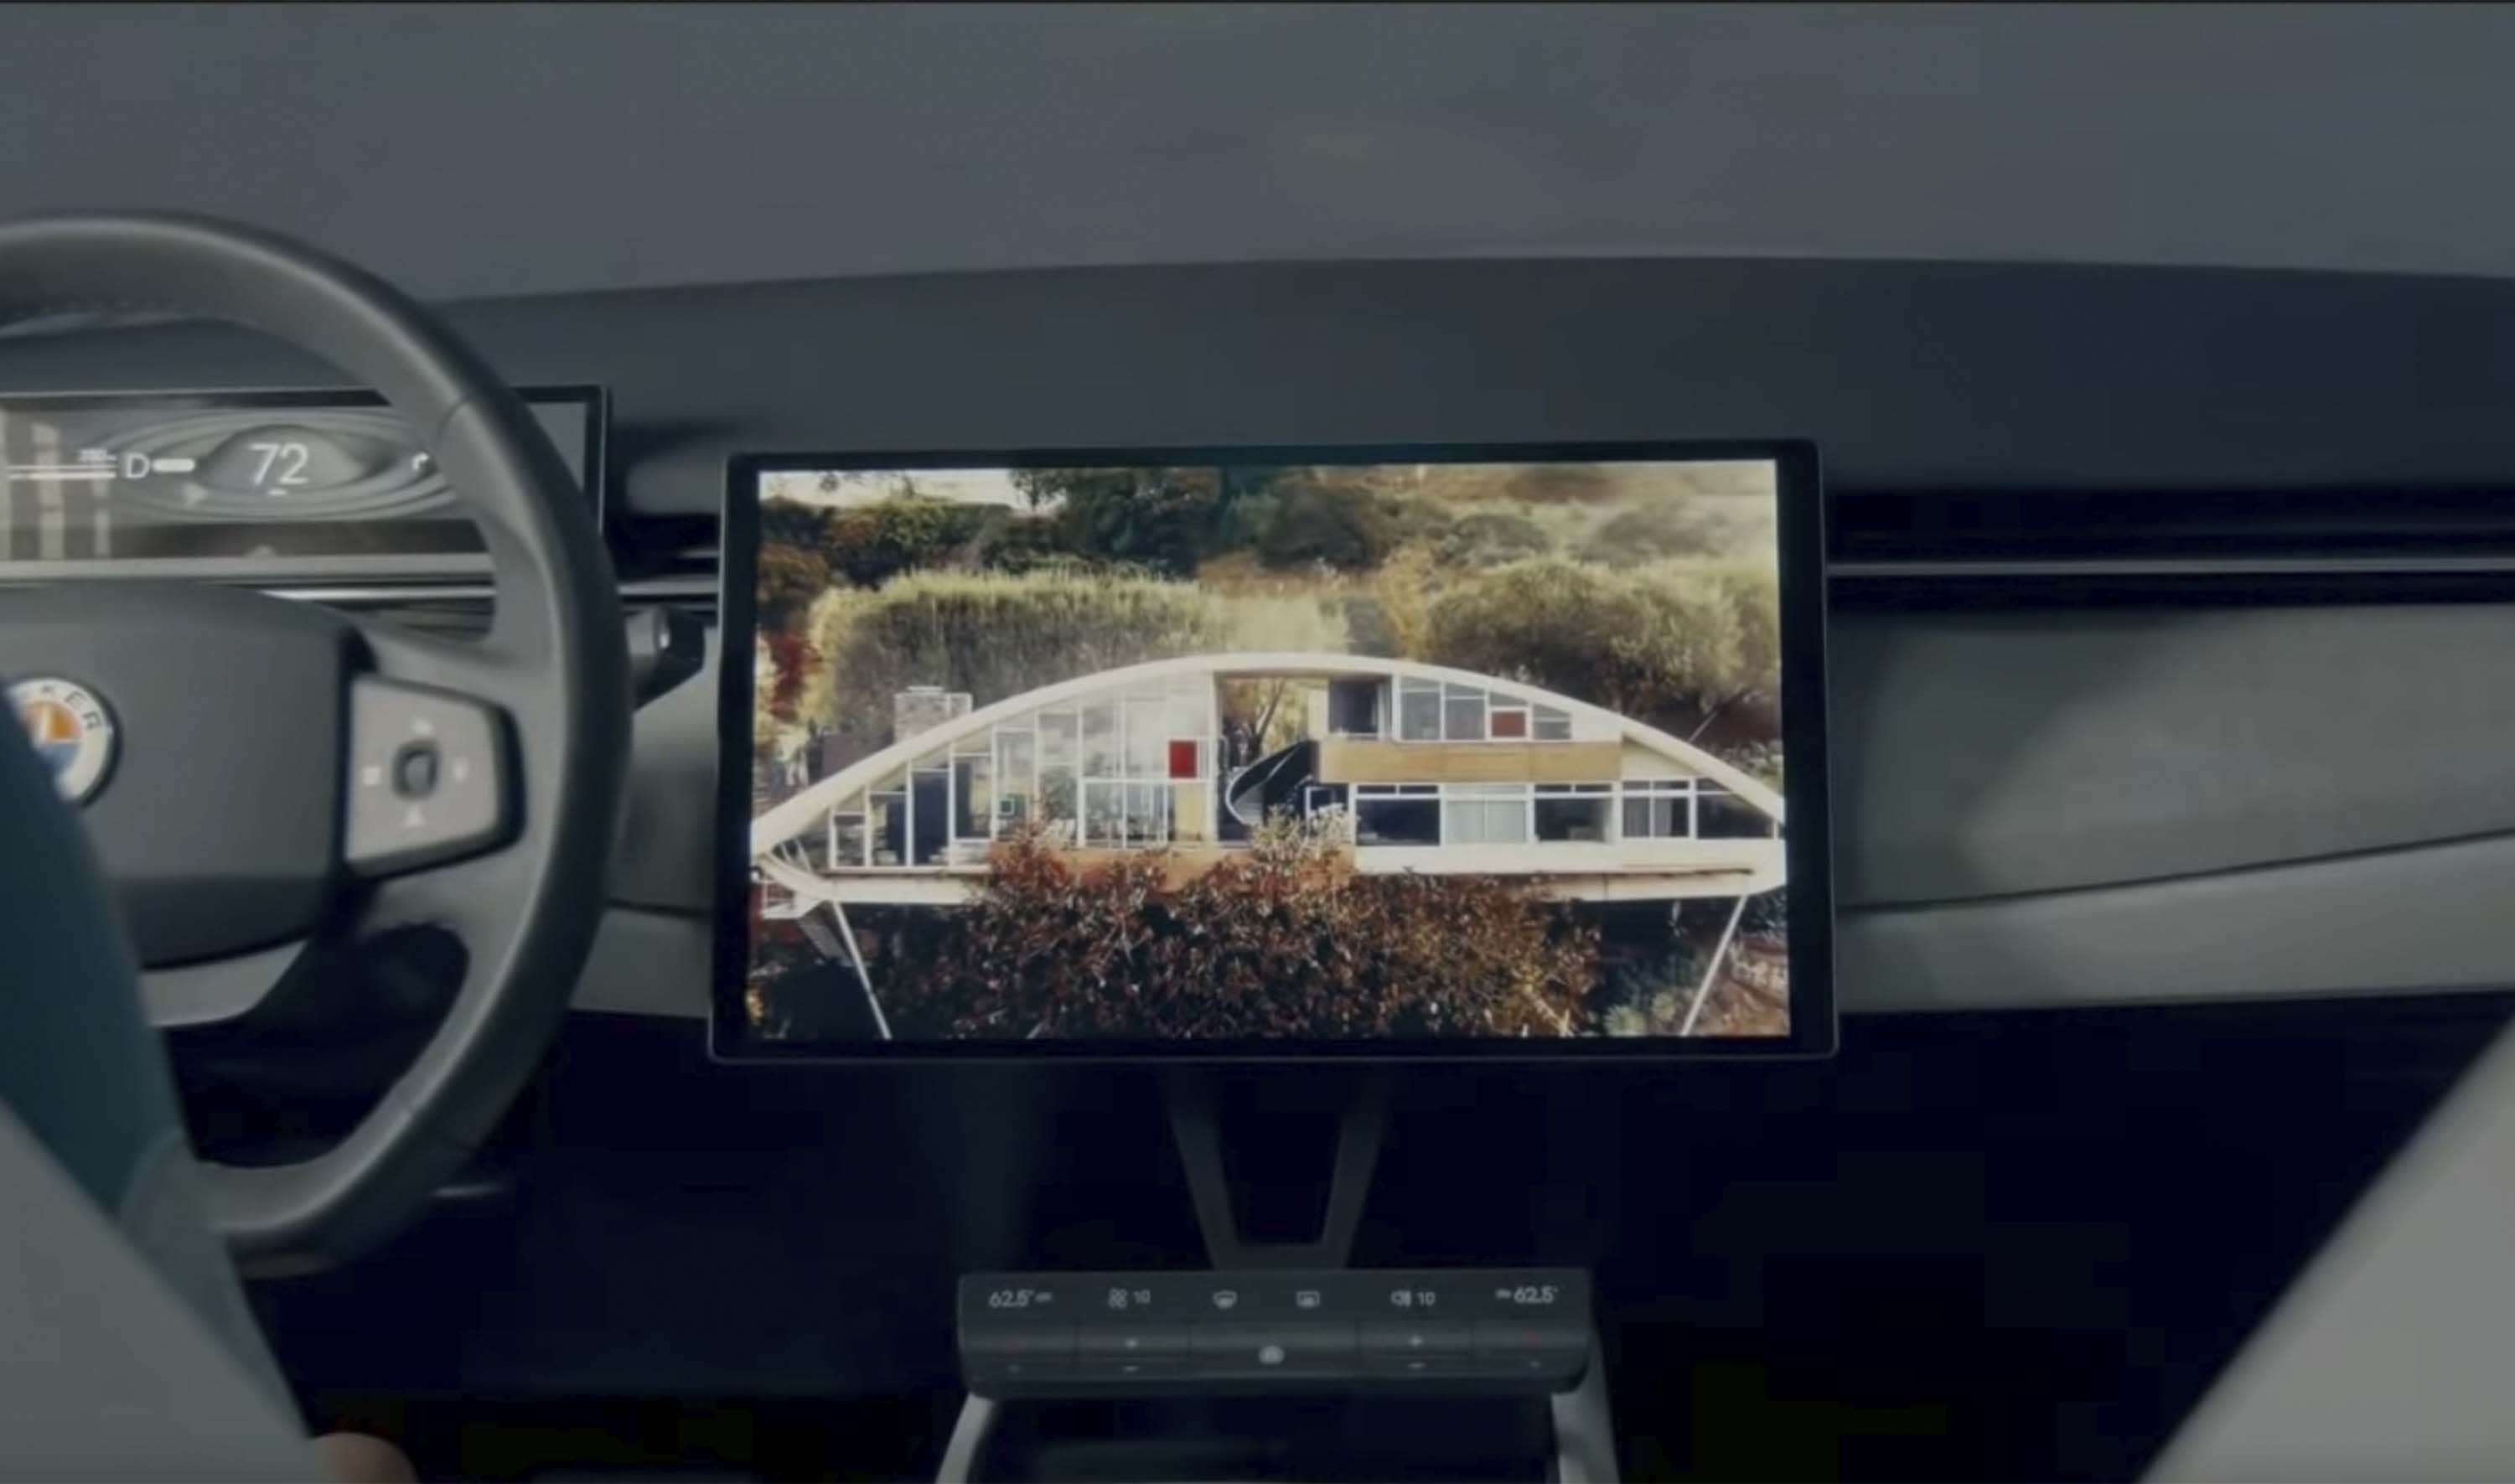 The Ocean’s screen in landscape. The screen was first seen as part of the production vehicle debut at the L.A. Autoshow last year. Fisker has reportedly filed a patent for the swiveling display. Credit: Fisker